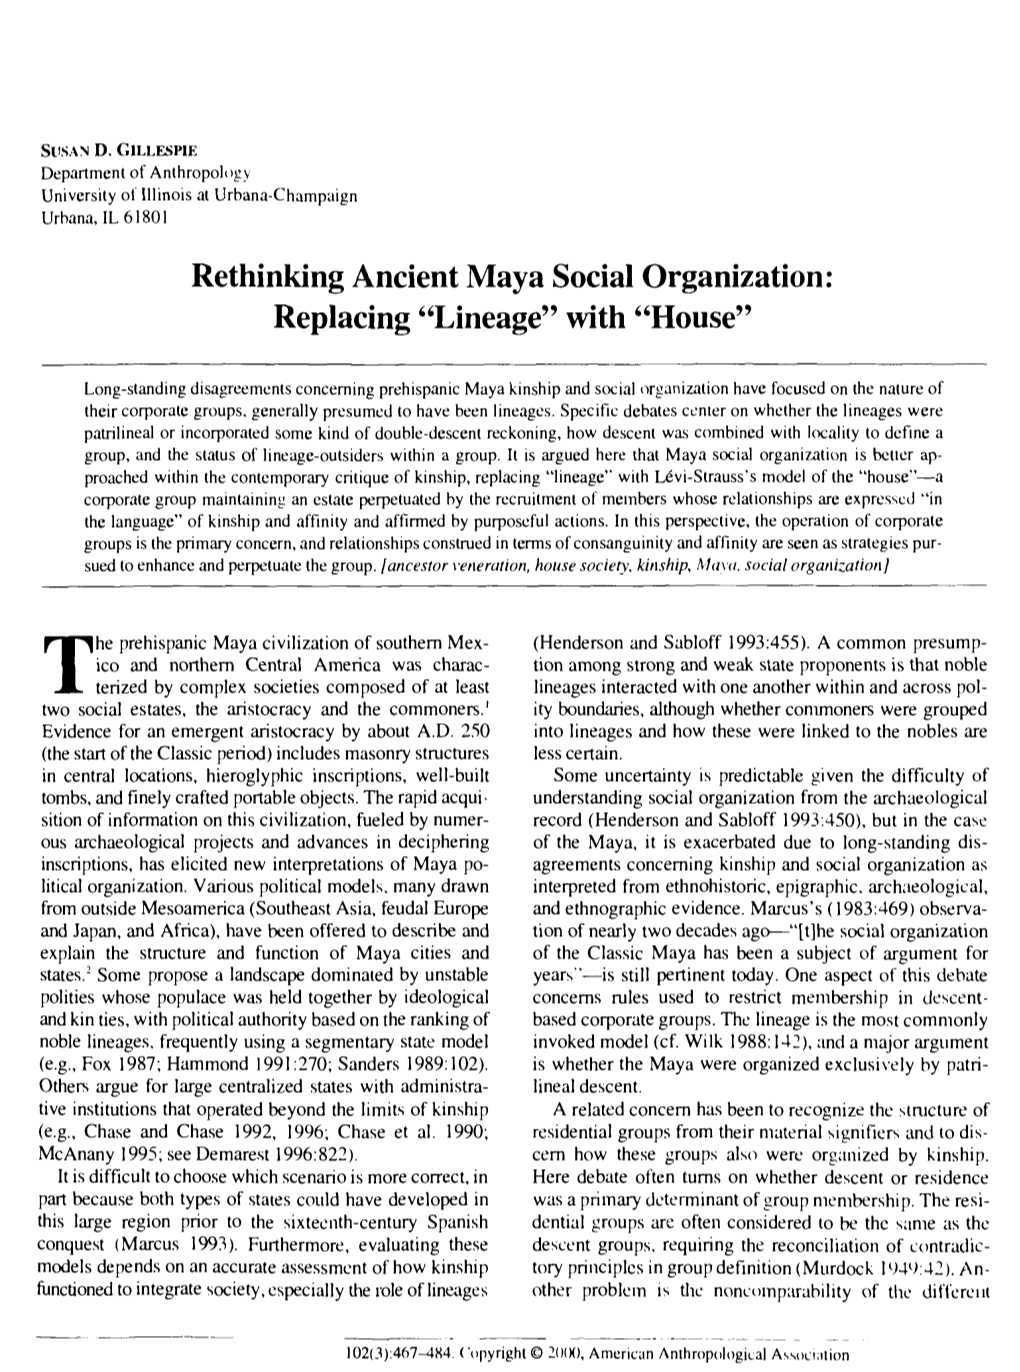 Rethinking Ancient Maya Social Organization: Replacing "Lineage" with "House"